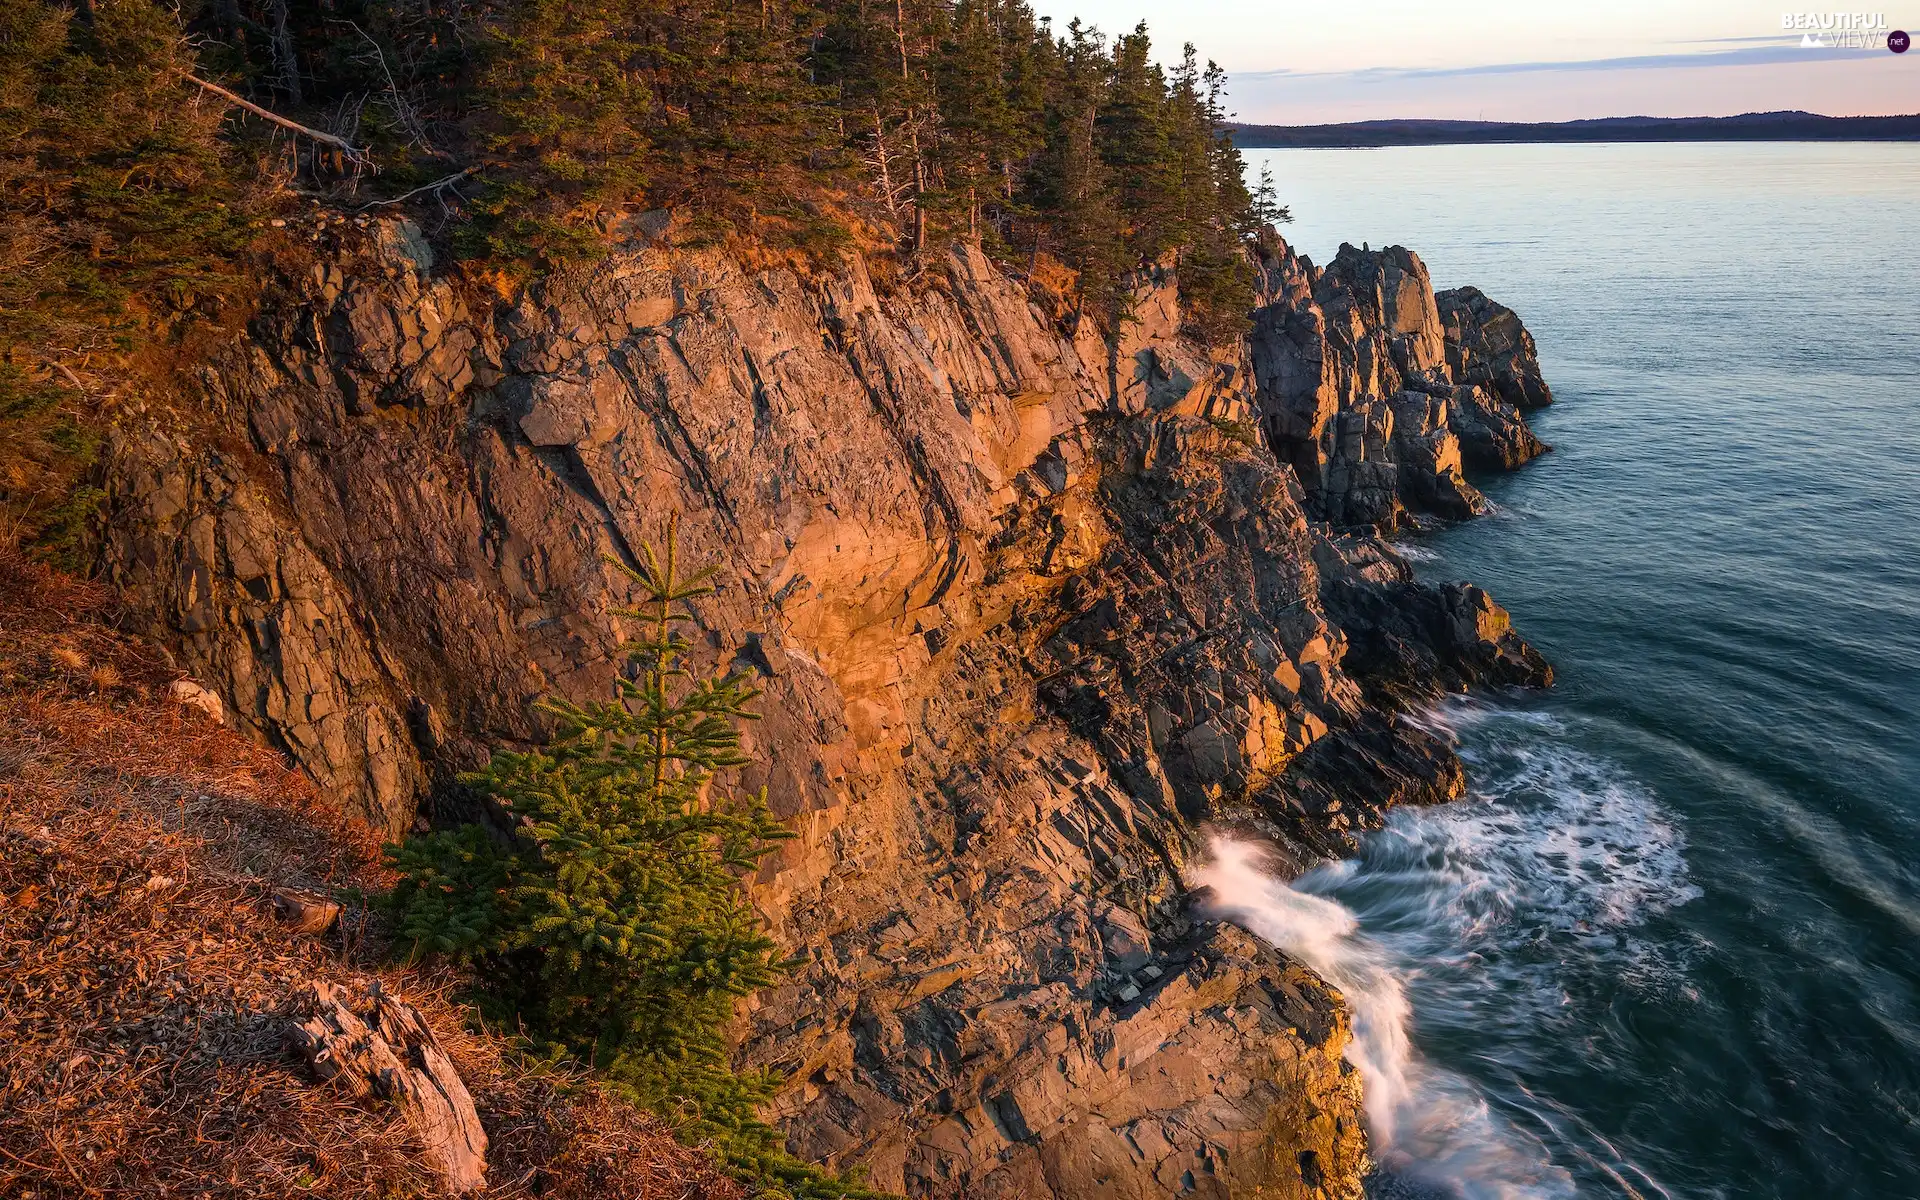 sea, Coast, cliff, rocks, viewes, State of Maine, The United States, trees